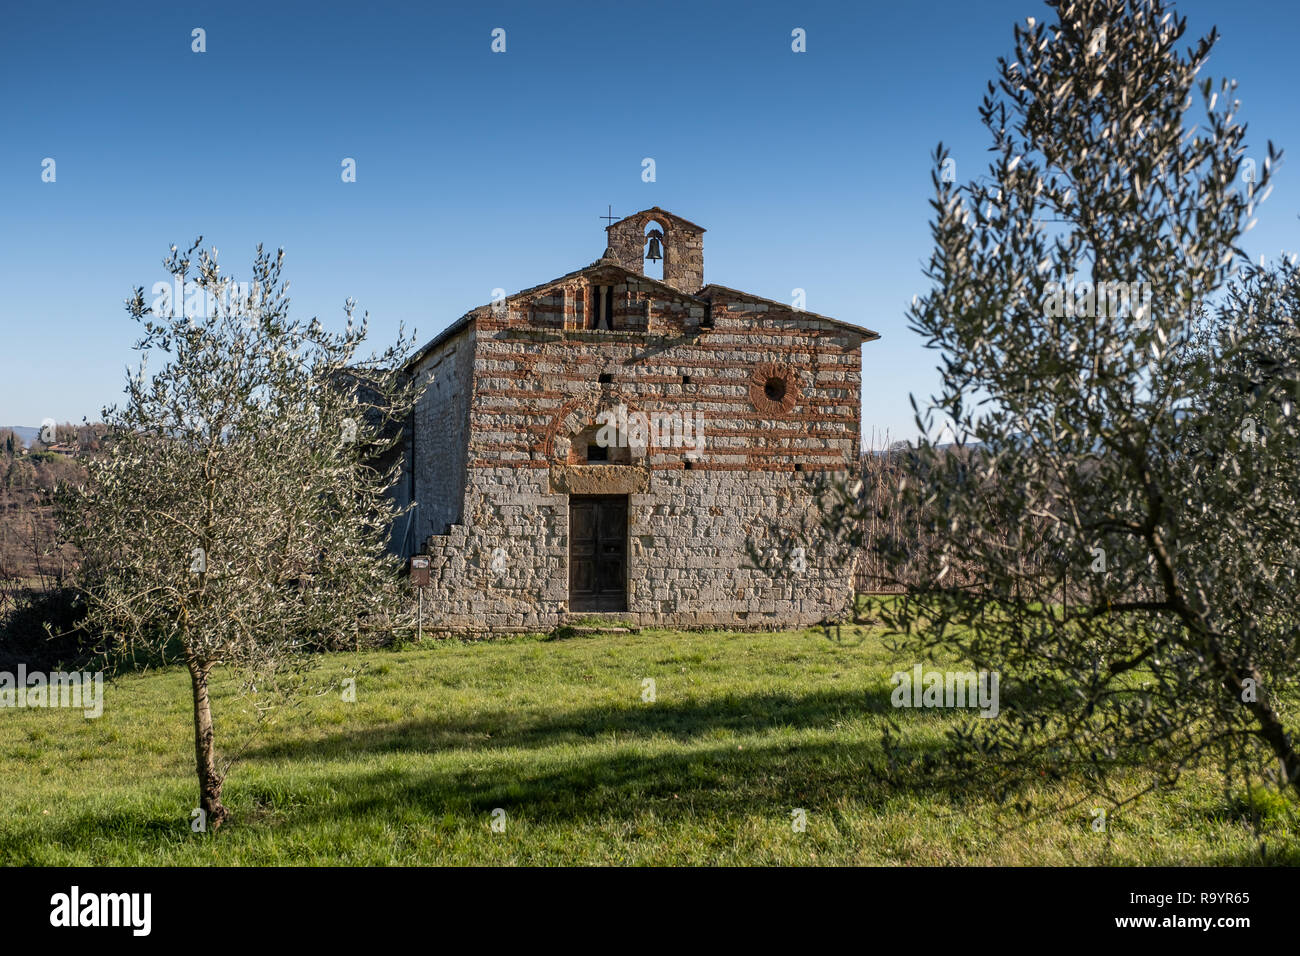 Santi Ippolito and Cassiano romanic church is a place of Catholic worship located in the locality of Coneo, in the municipality of Colle di Val d'Elsa Stock Photo